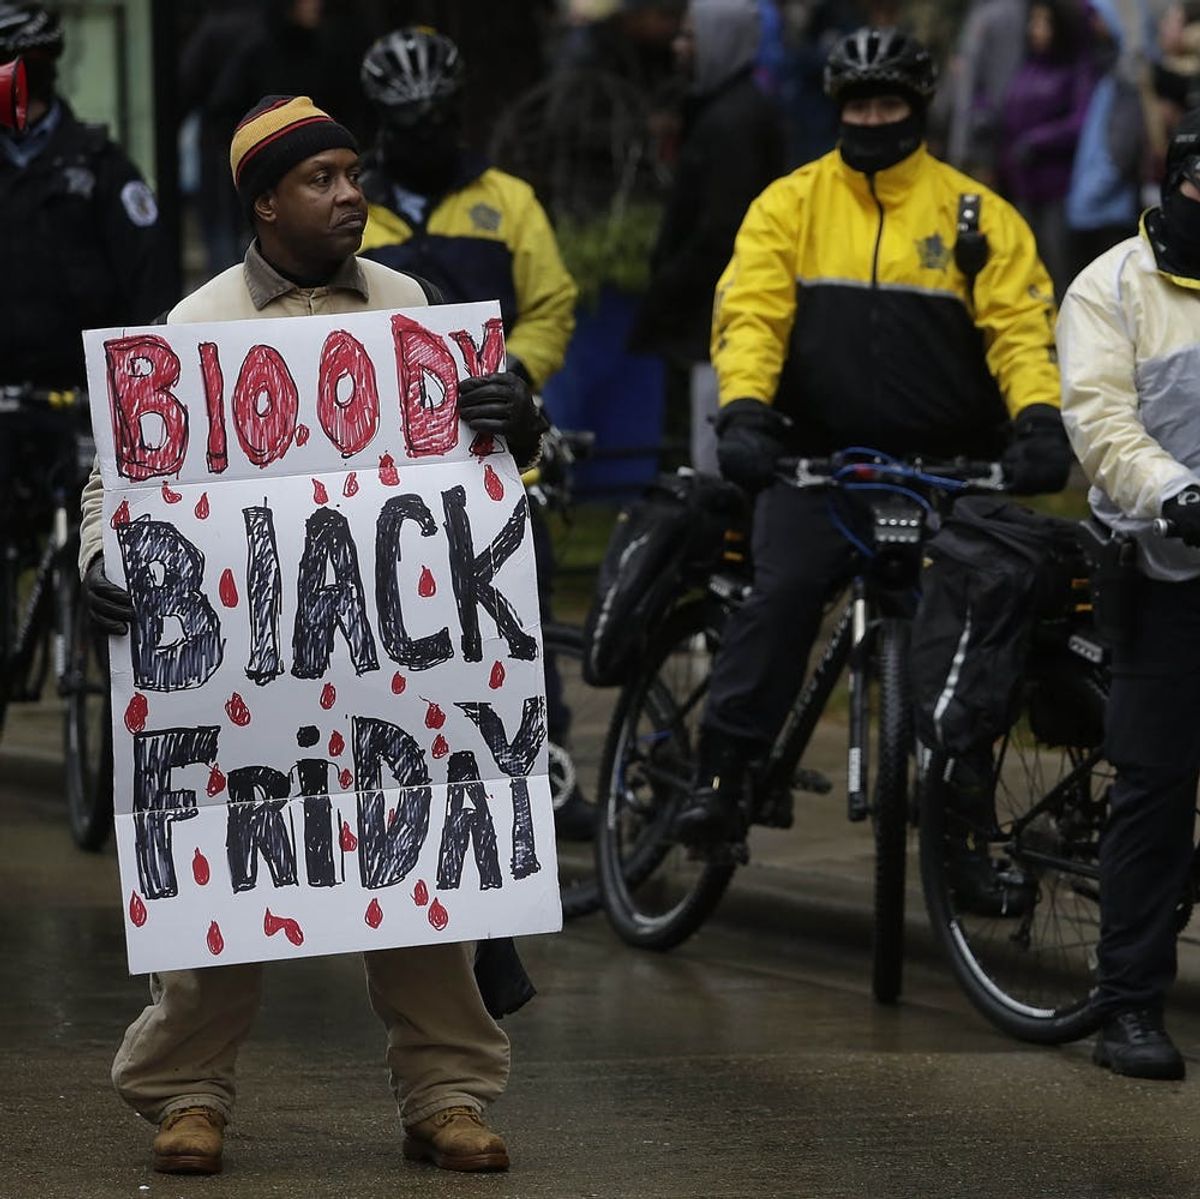 Why Activists Are Boycotting Black Friday in a “Day of Defiance”